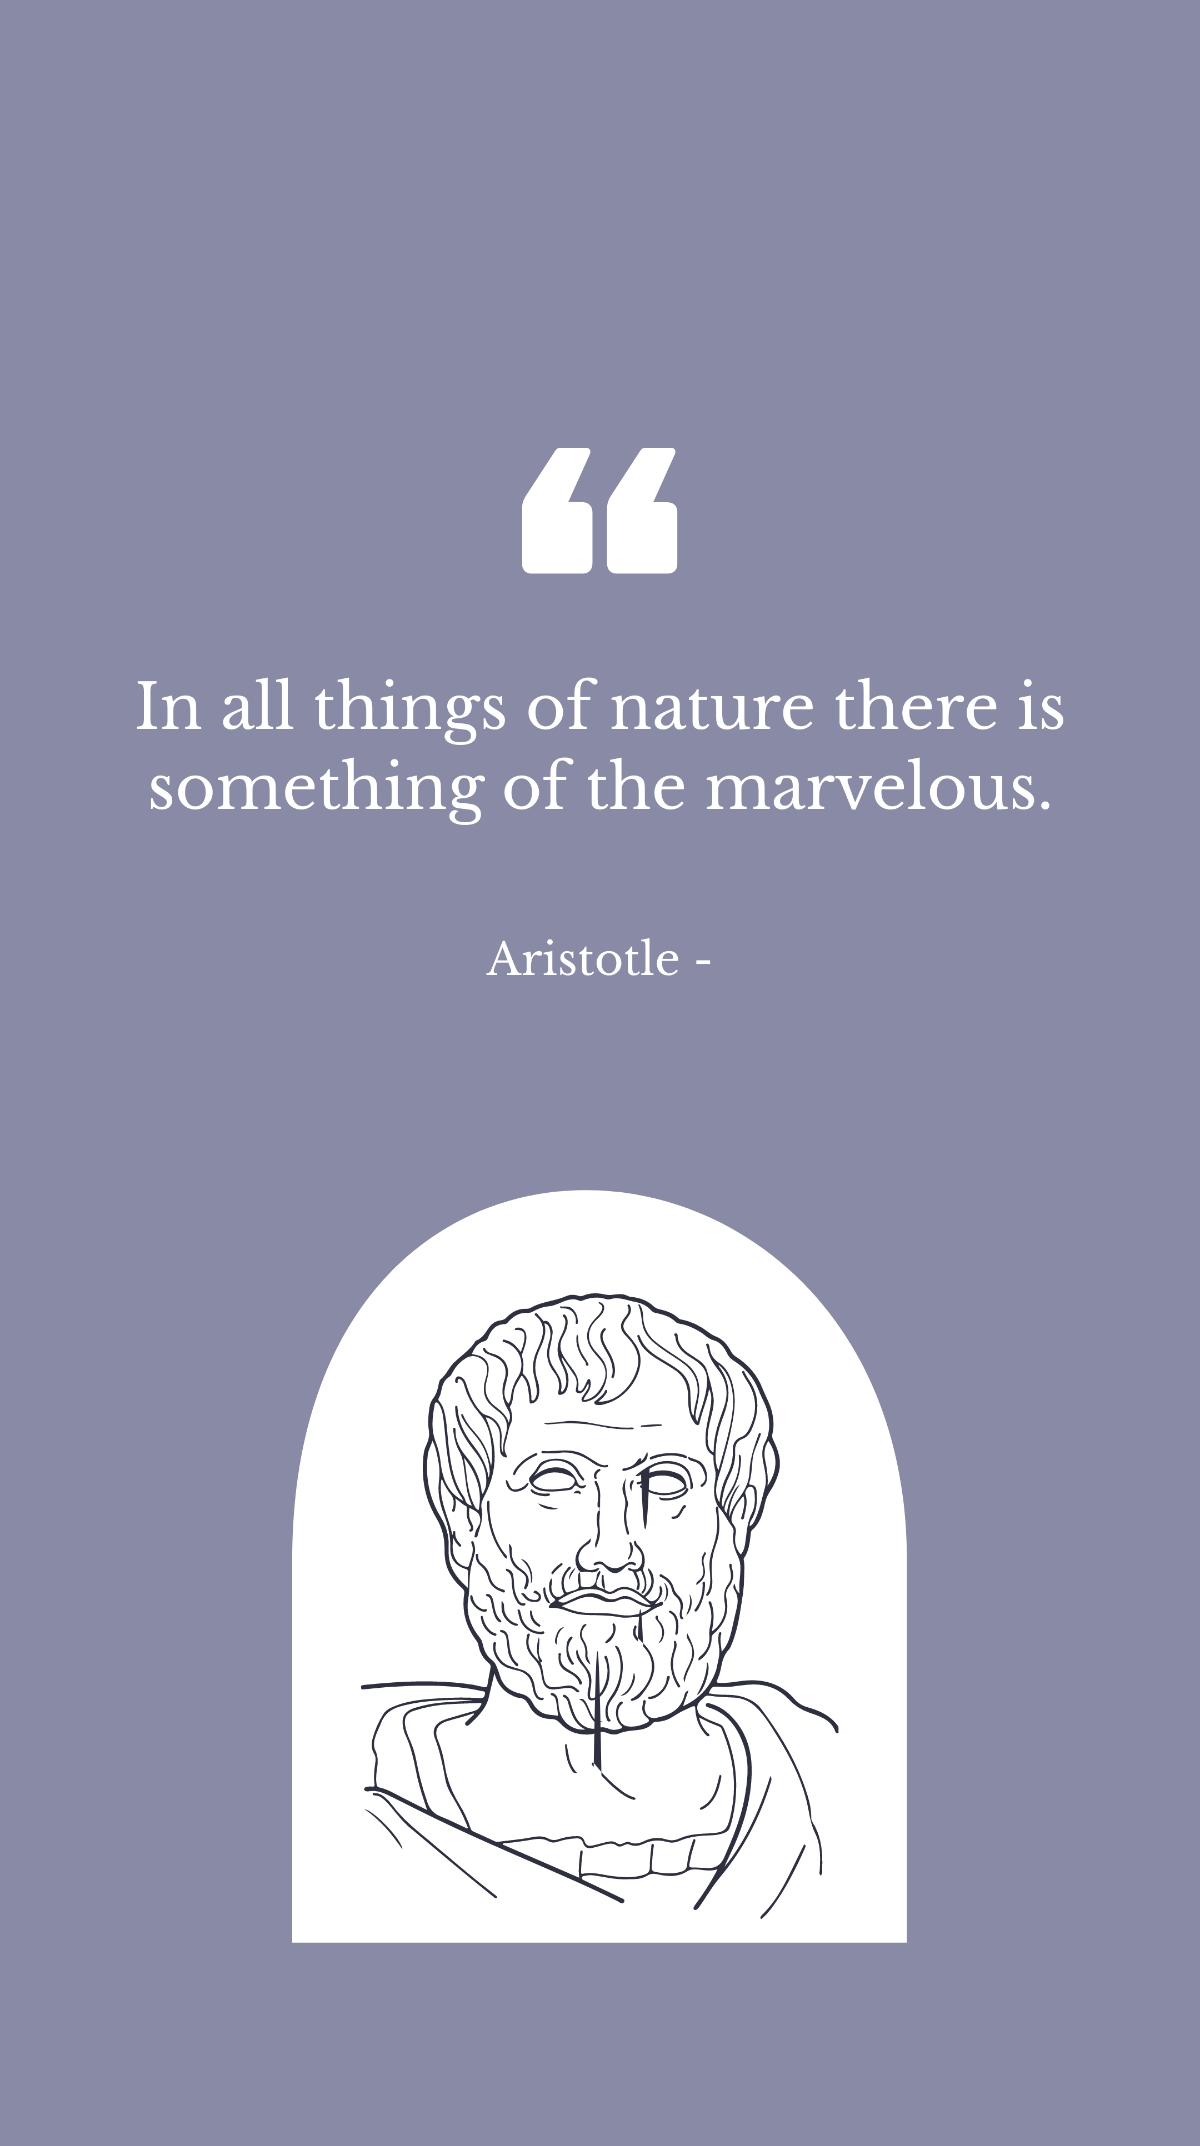 Free Aristotle - In all things of nature there is something of the marvelous. Template